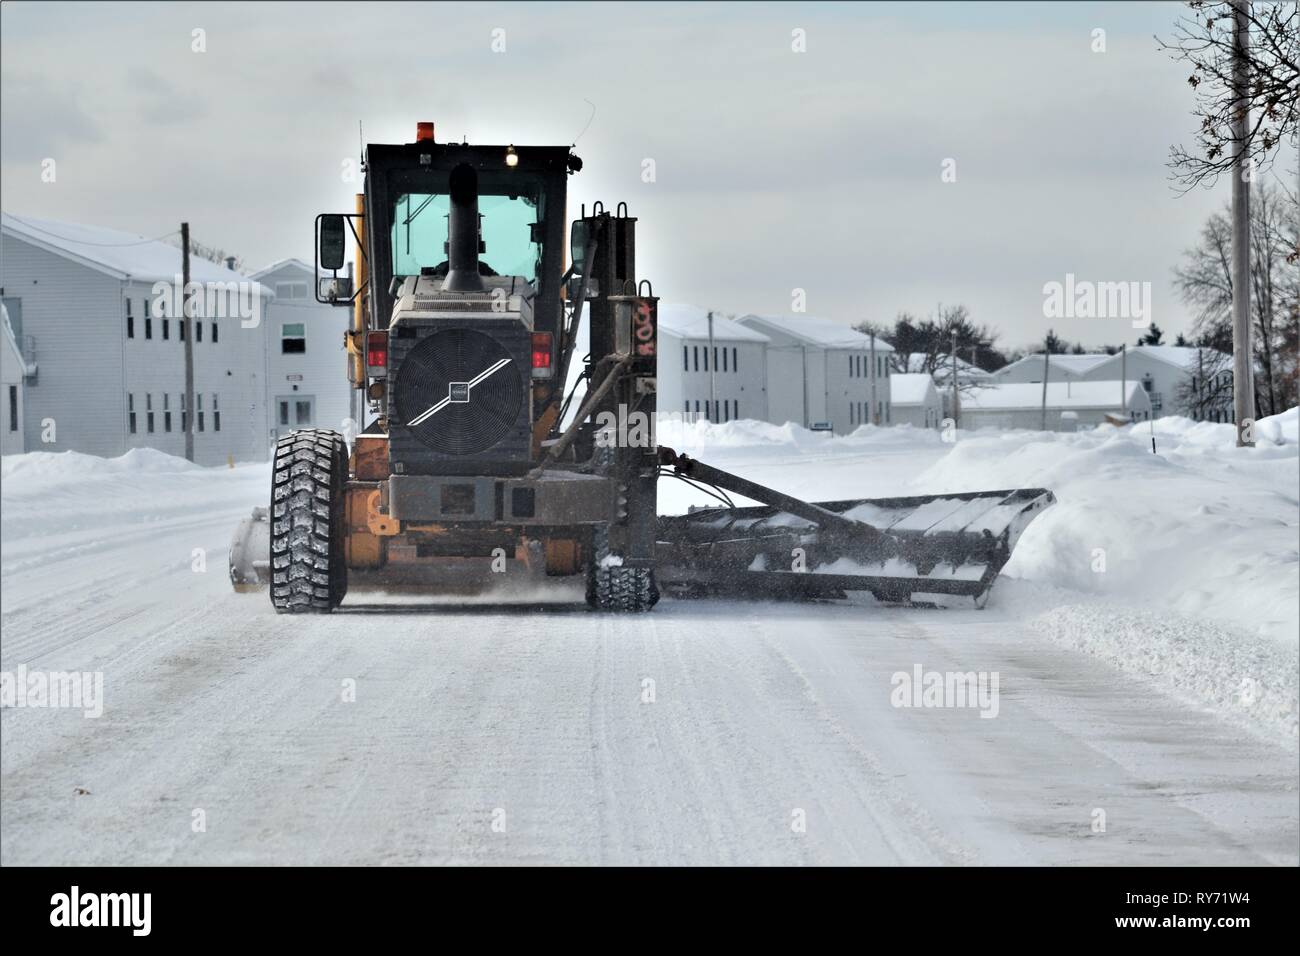 An equipment operator with the Fort McCoy snow removal contractor, Kaiyuh Services LLC of Anchorage, Alaska, clears snow Feb. 27, 2019, at Fort McCoy, Wis. Winter in Wisconsin can provide all kinds of bad weather, including freezing rain, snow, or sleet at any time or even all in one day. When that happens, the Fort McCoy snow-removal team plows through whatever Mother Nature dishes out. The team includes as well as Directorate of Public Works personnel. The team helps keep more than 400 miles of roads, sidewalks, and parking areas clear so the Fort McCoy workforce can operate safely. (U.S. Ar Stock Photo